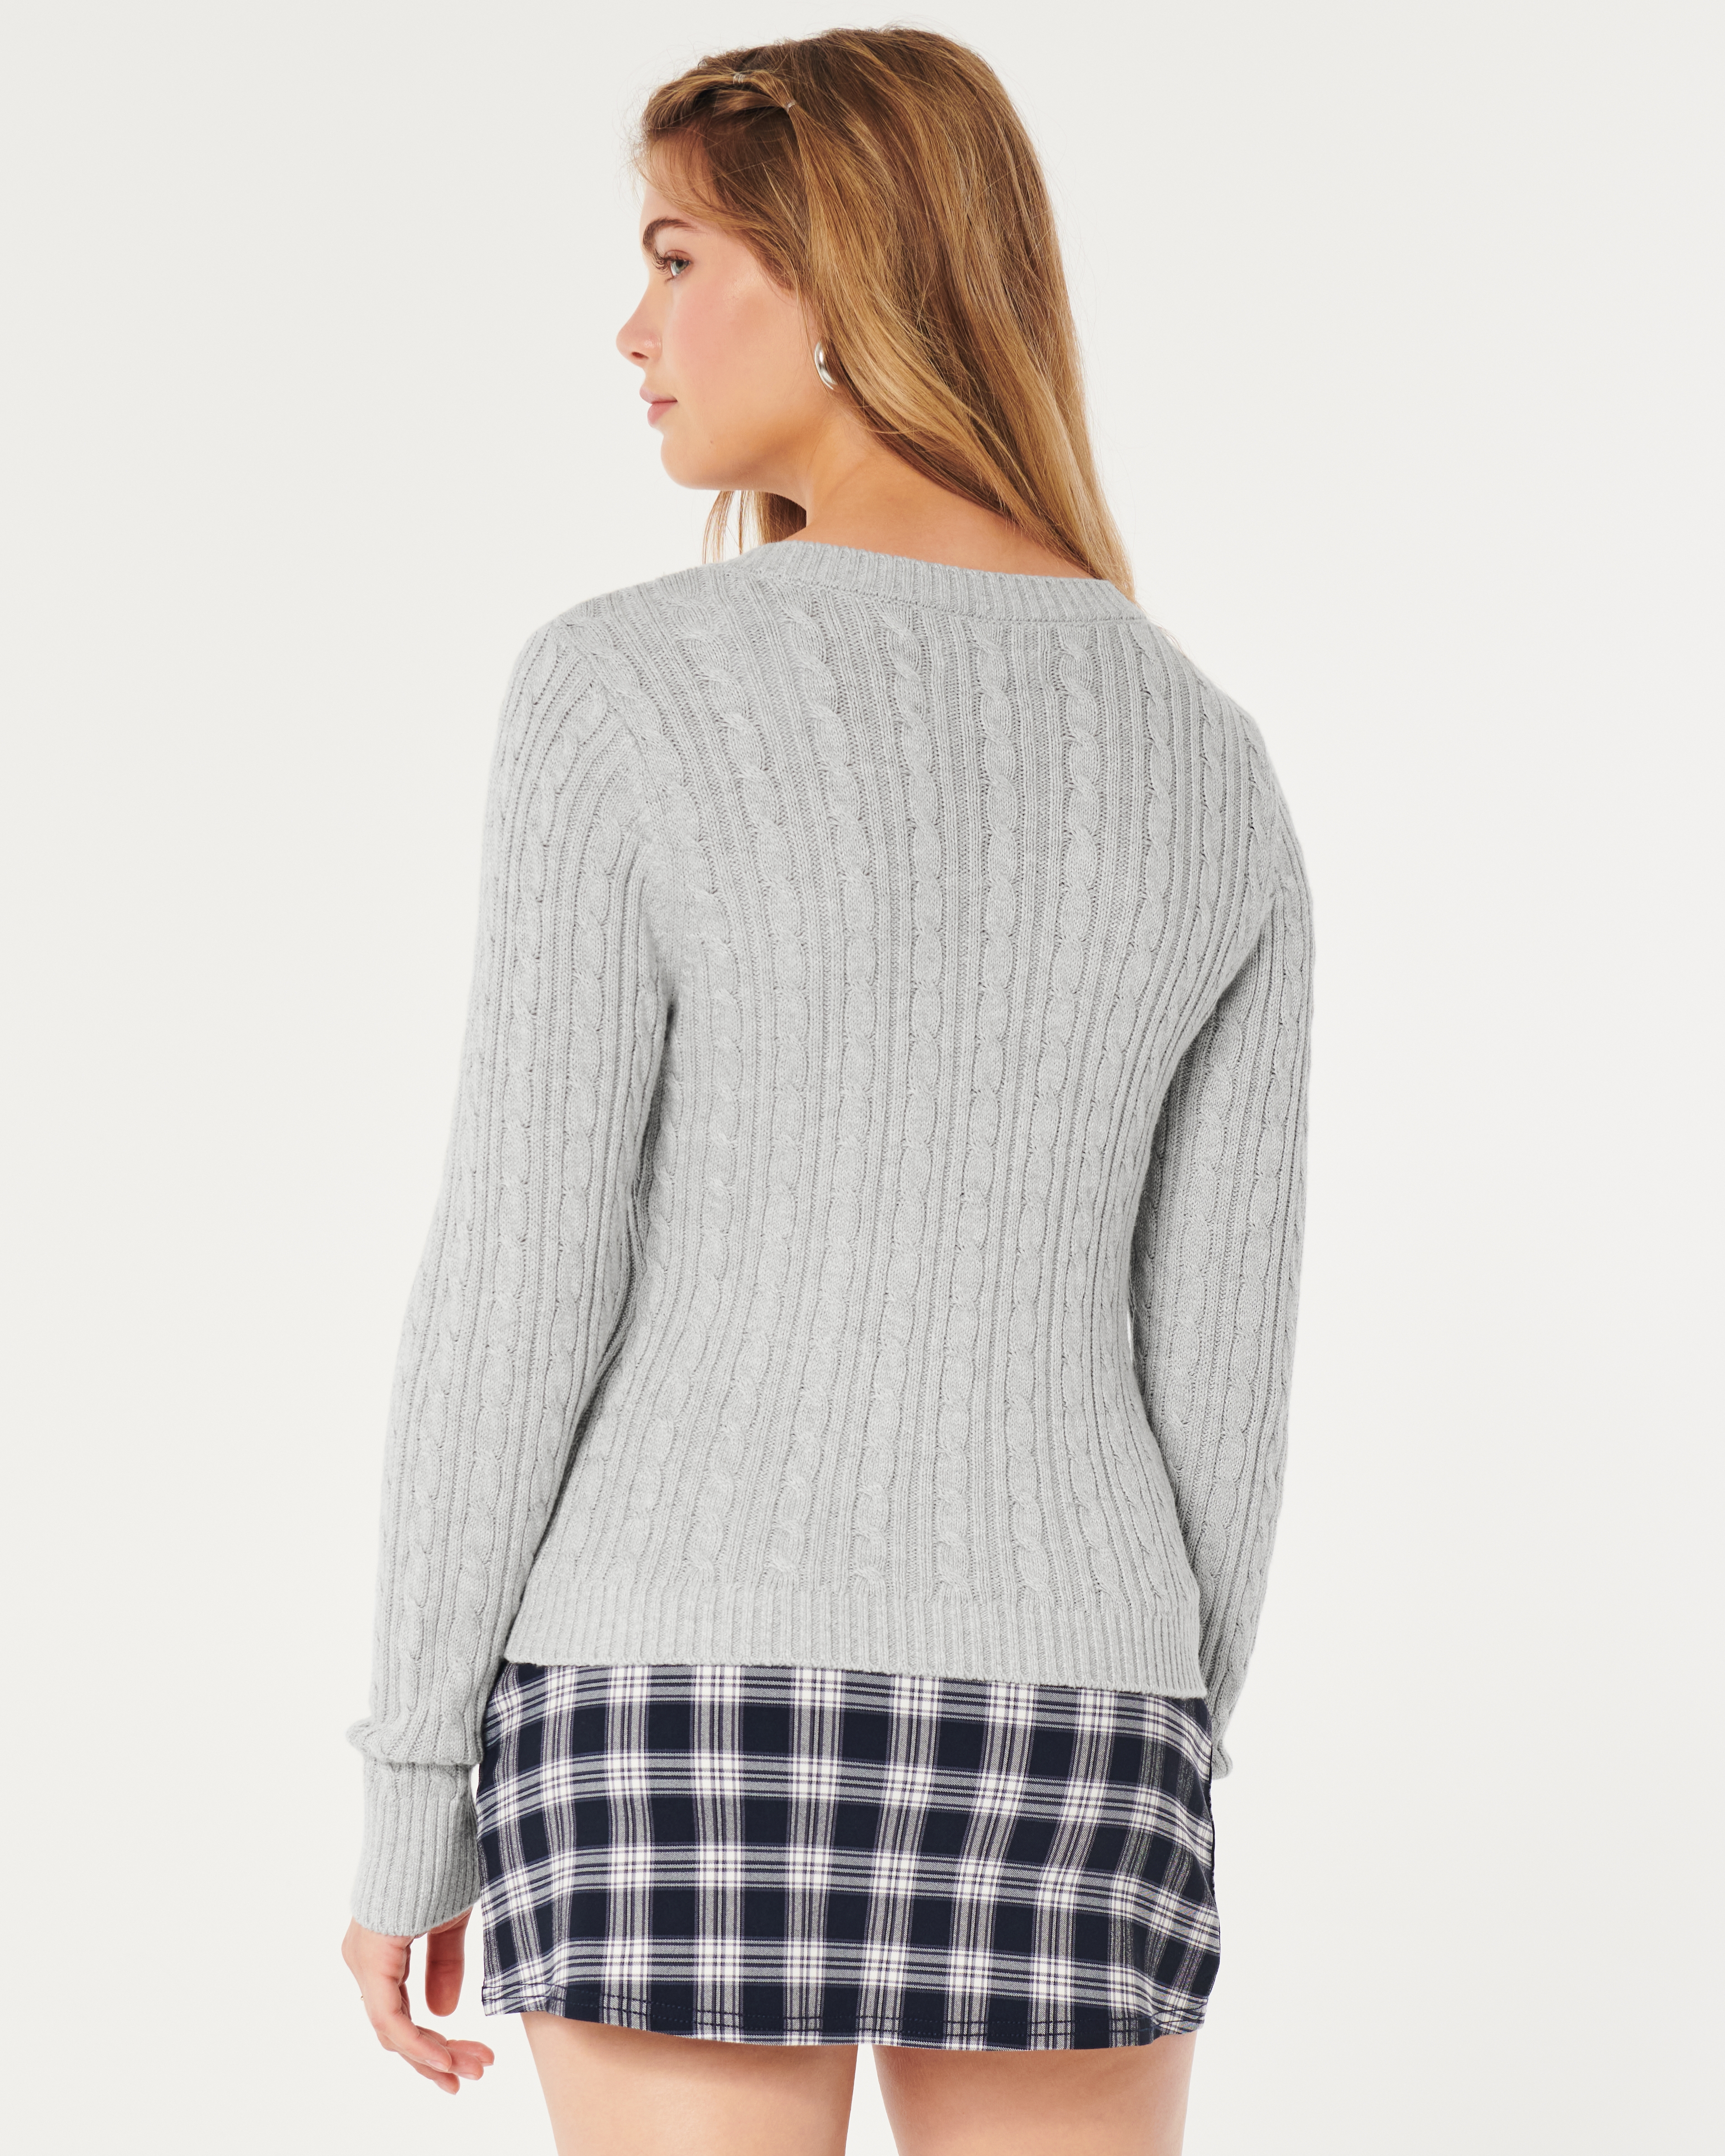 Women's Cable-Knit Icon V-Neck Sweater | Women's Tops | HollisterCo.ca